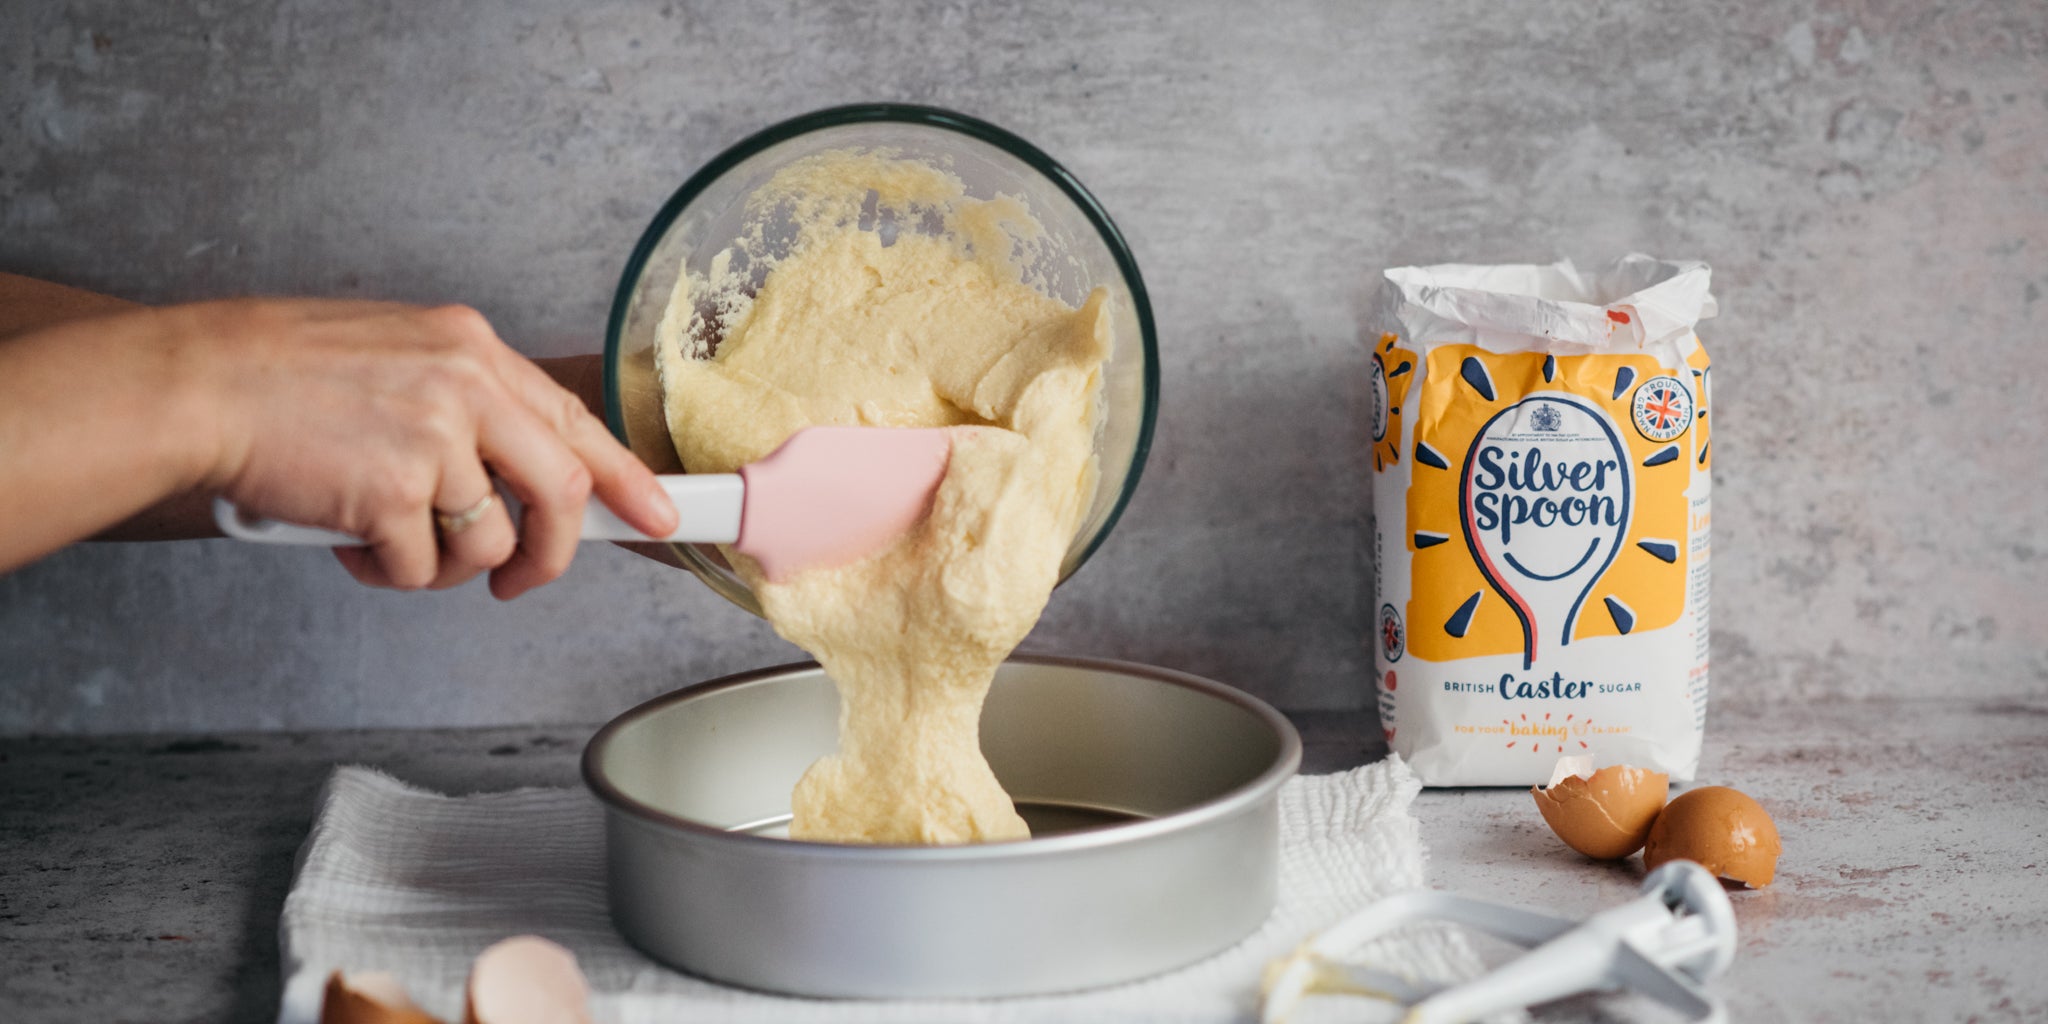 Gluten Free Victoria Sponge batter being poured with hands holding a silicone spatula into a lined baking tray, next to a bag of Silver Spoon Caster Sugar